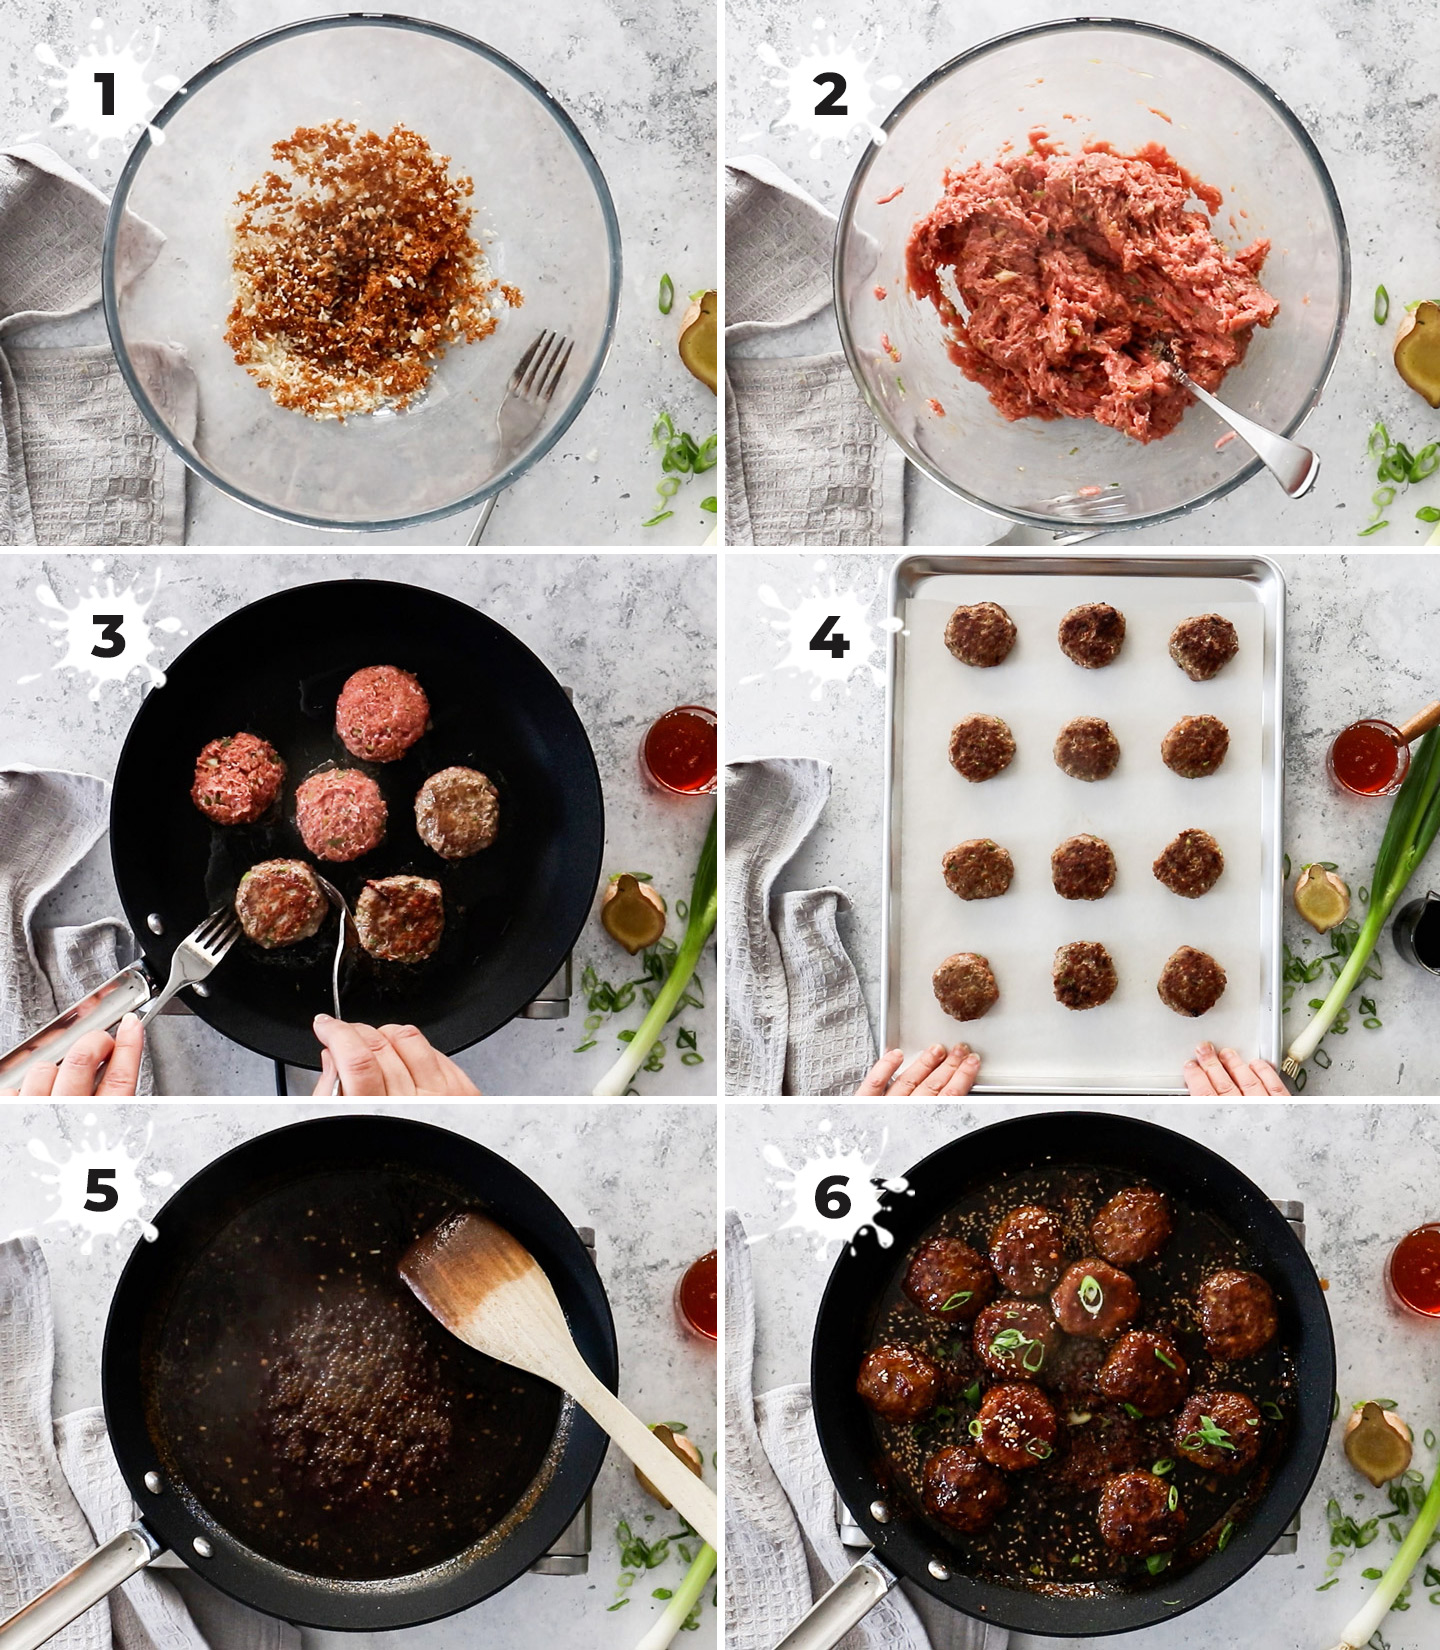 A collage showing how to make turkey rissoles.